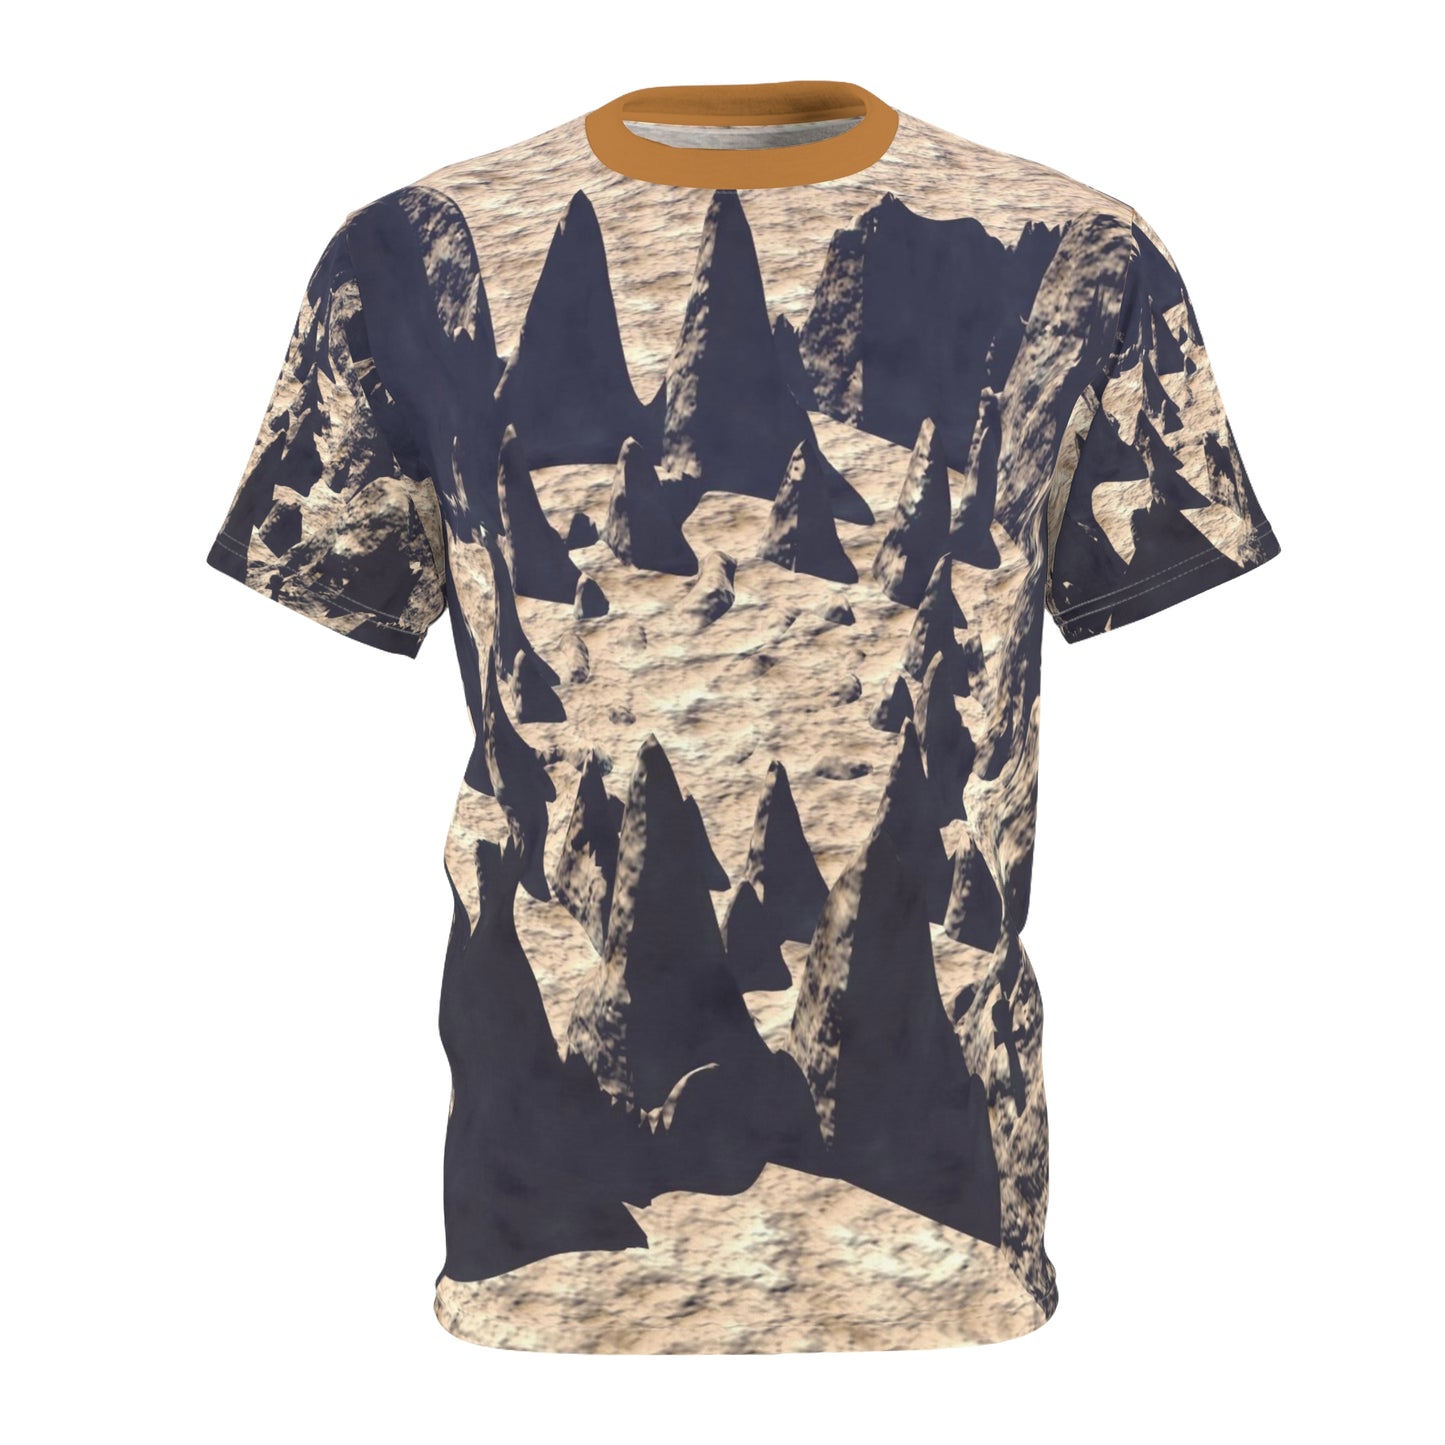 For The Landscape In You Unisex T-Shirt